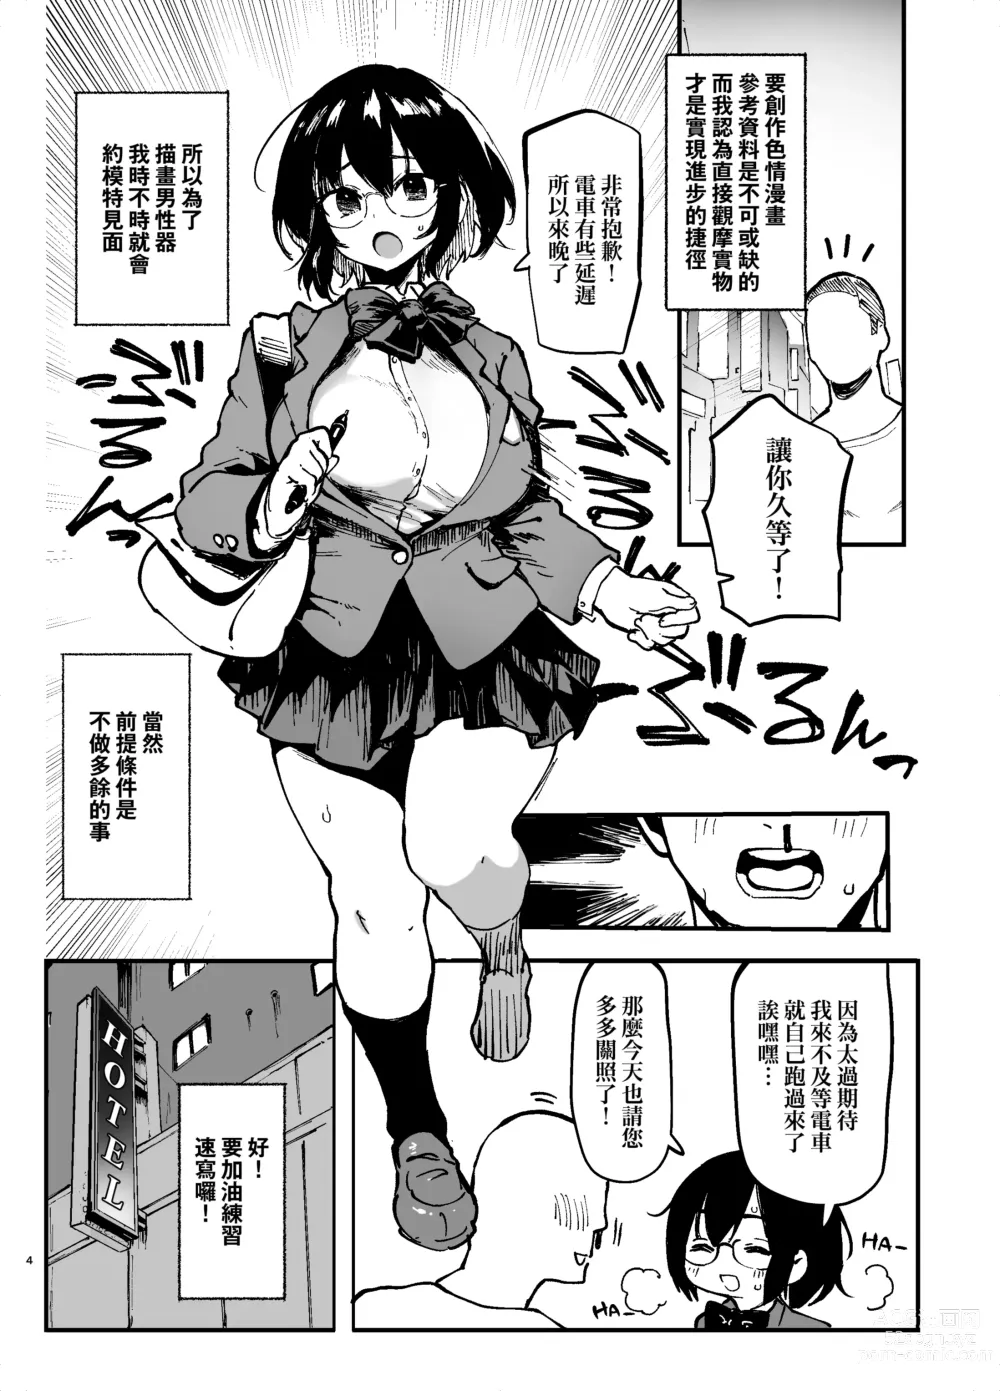 Page 4 of doujinshi OeAe